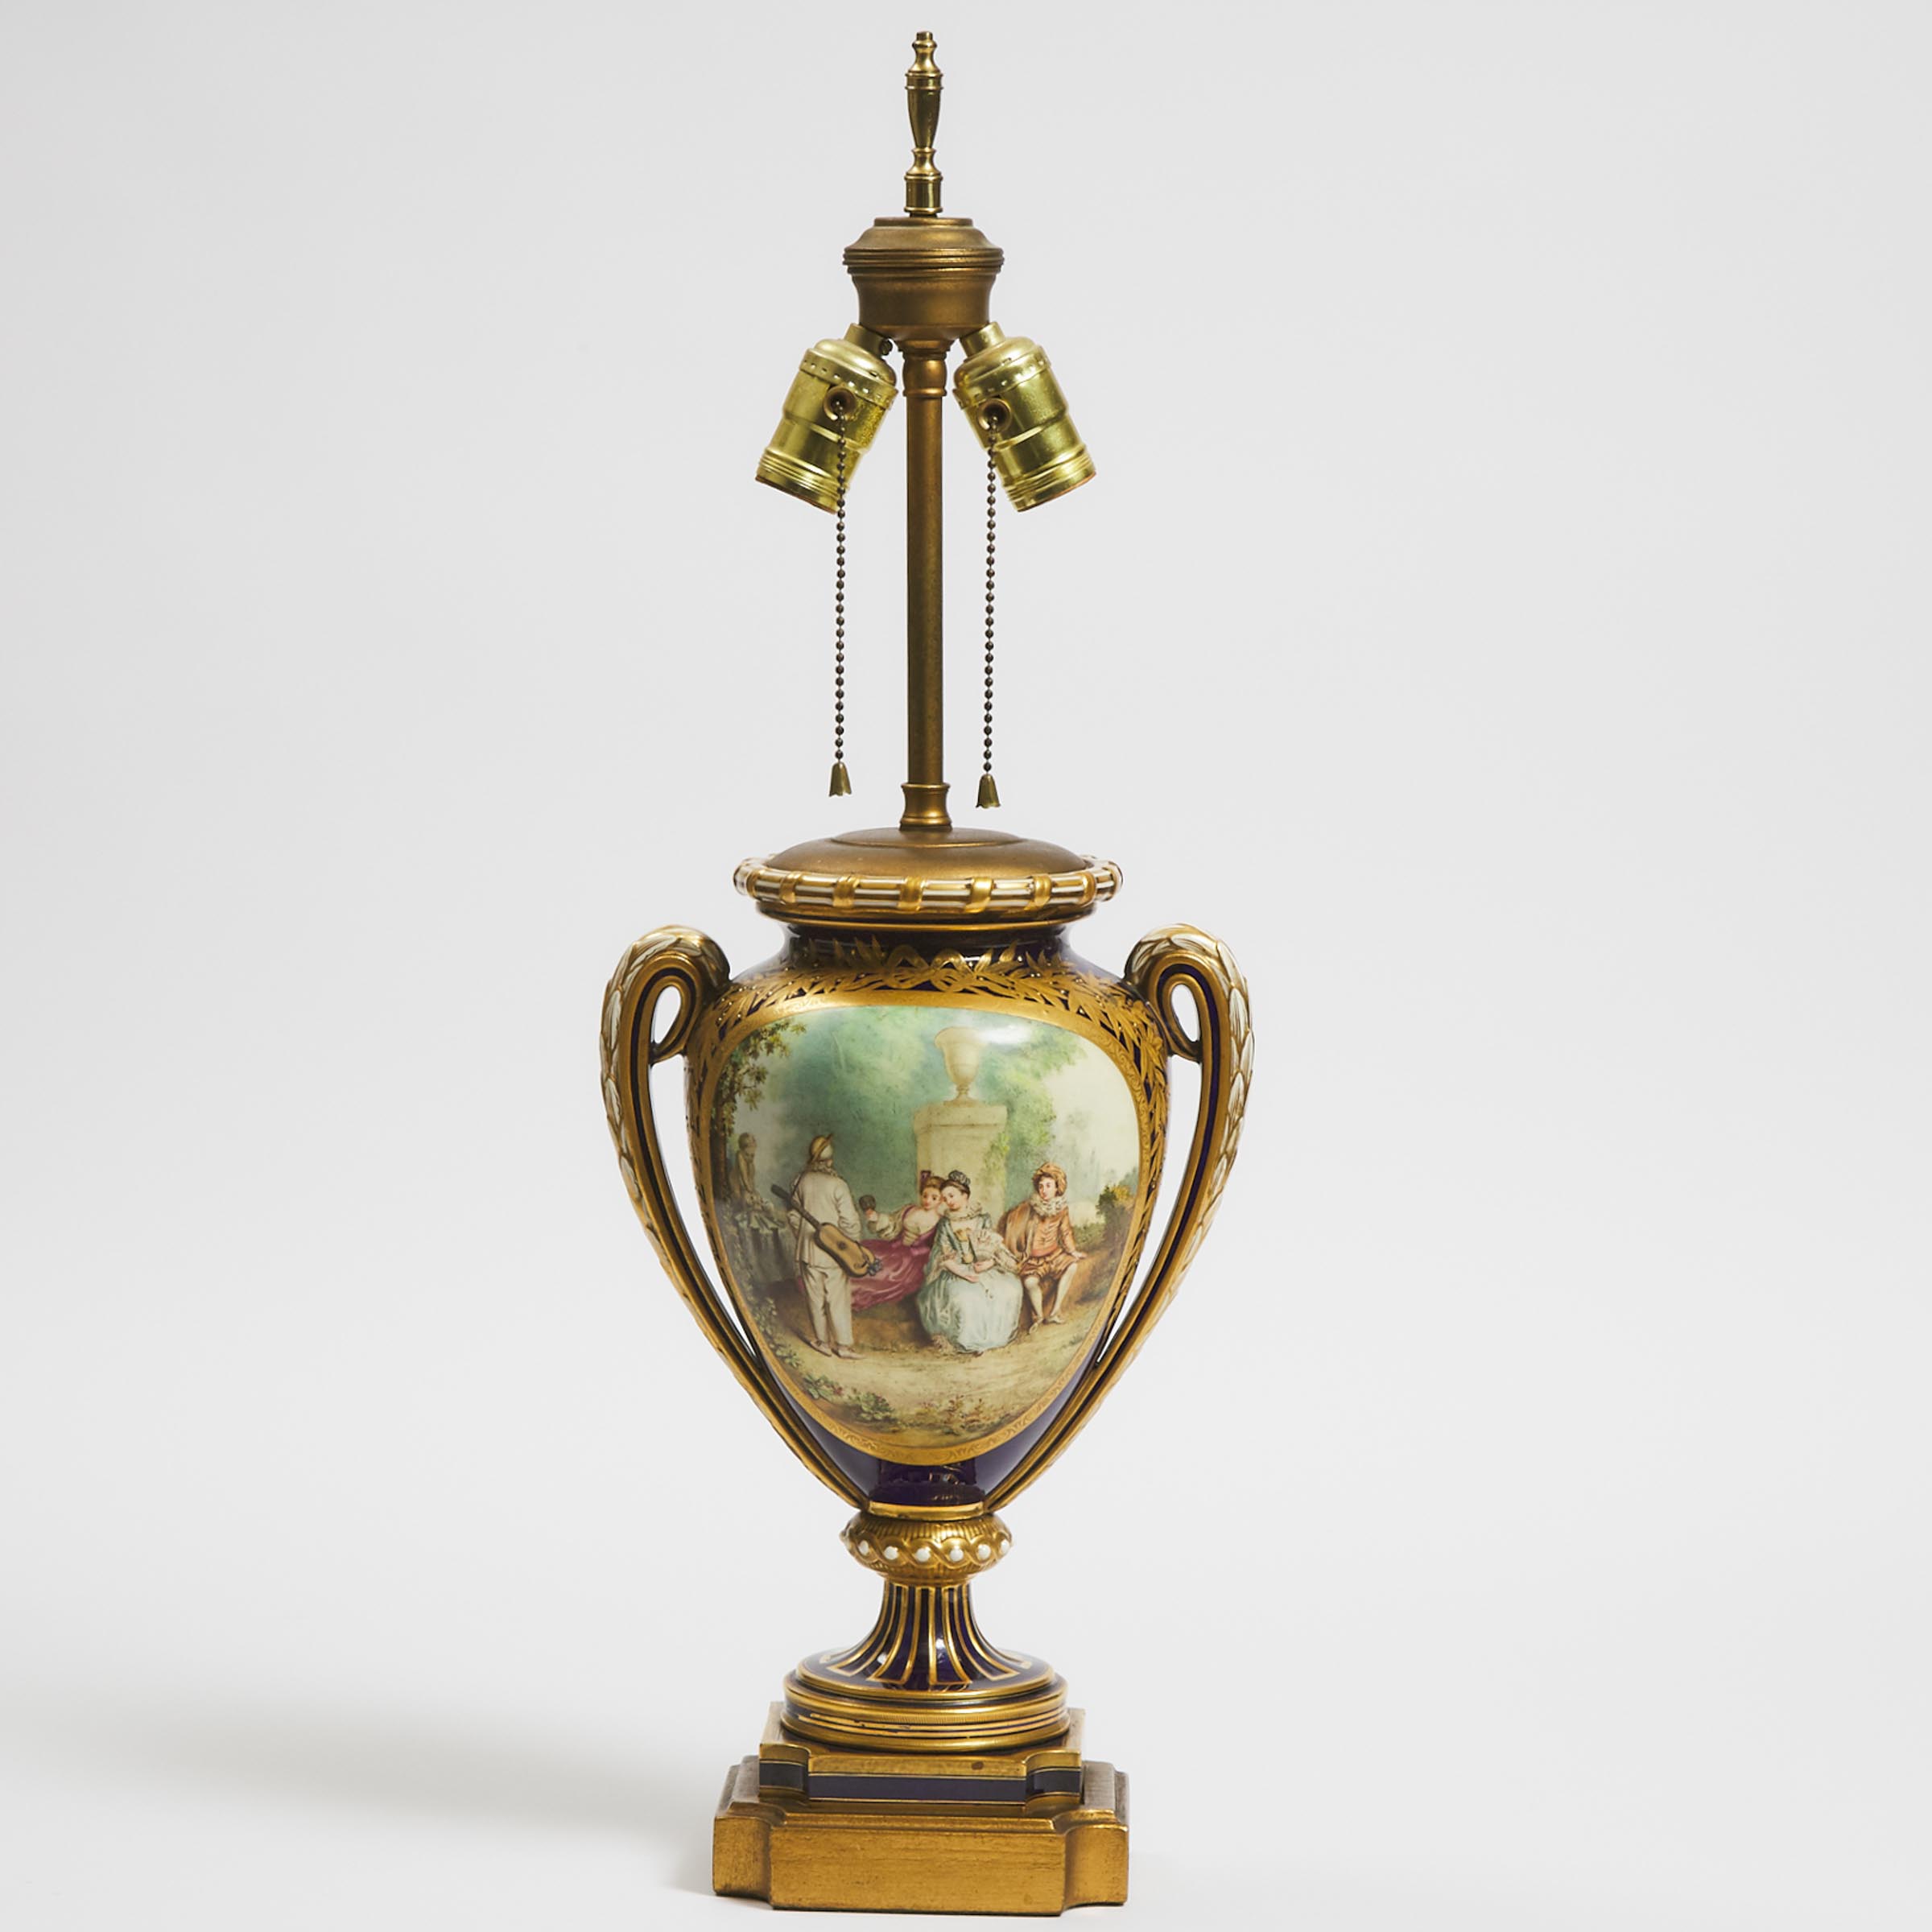 'Sèvres' Blue Ground Two-Handled Table Lamp, late 19th century